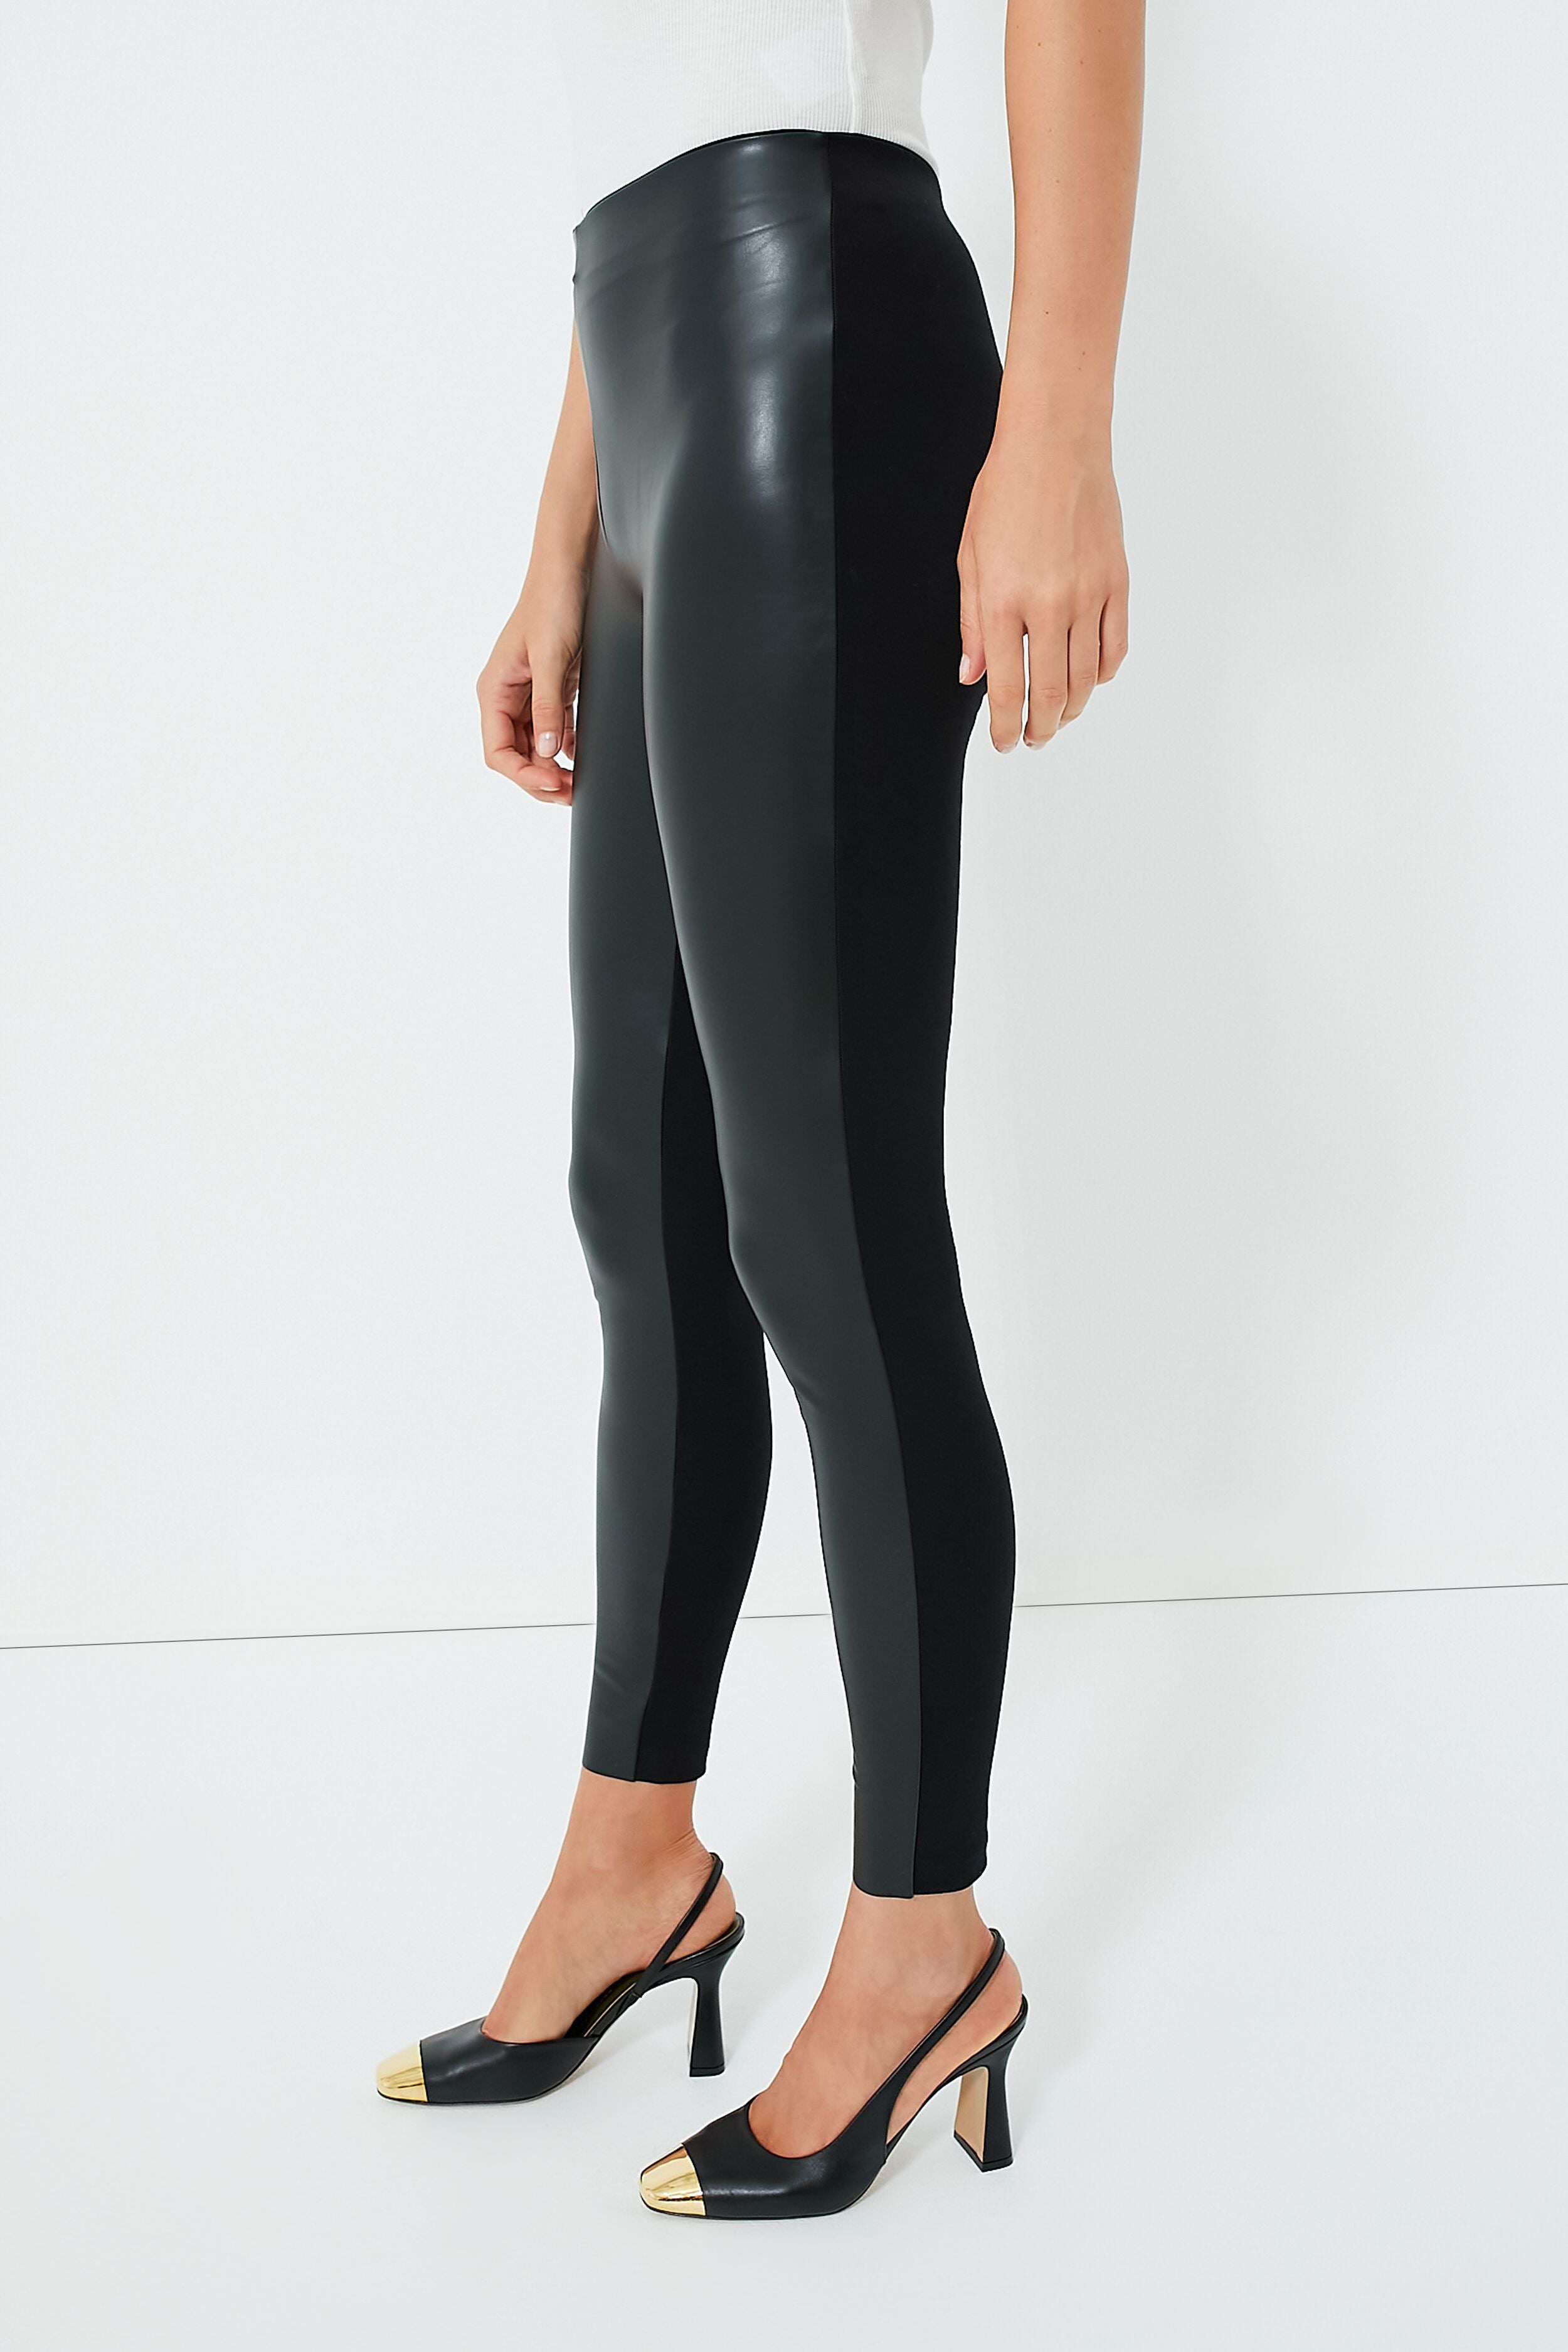 Details more than 69 leather front leggings latest